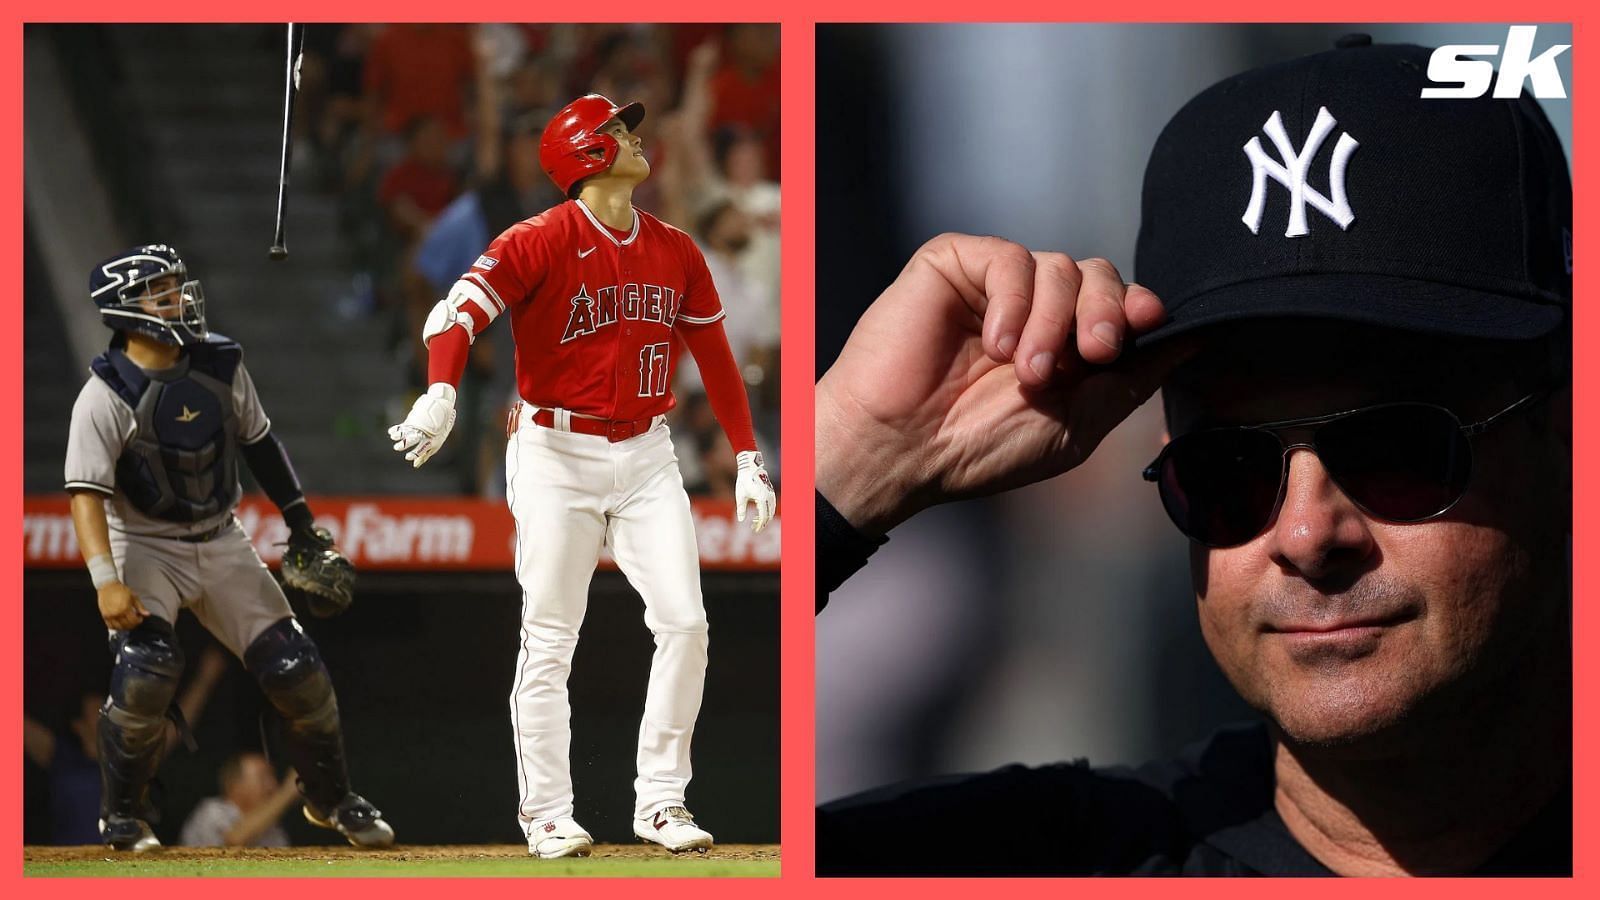 New York Yankees manager Aaron Boone bristles at suggestion that he should have walked $30,000,000 man Shohei Ohtani before epic homer